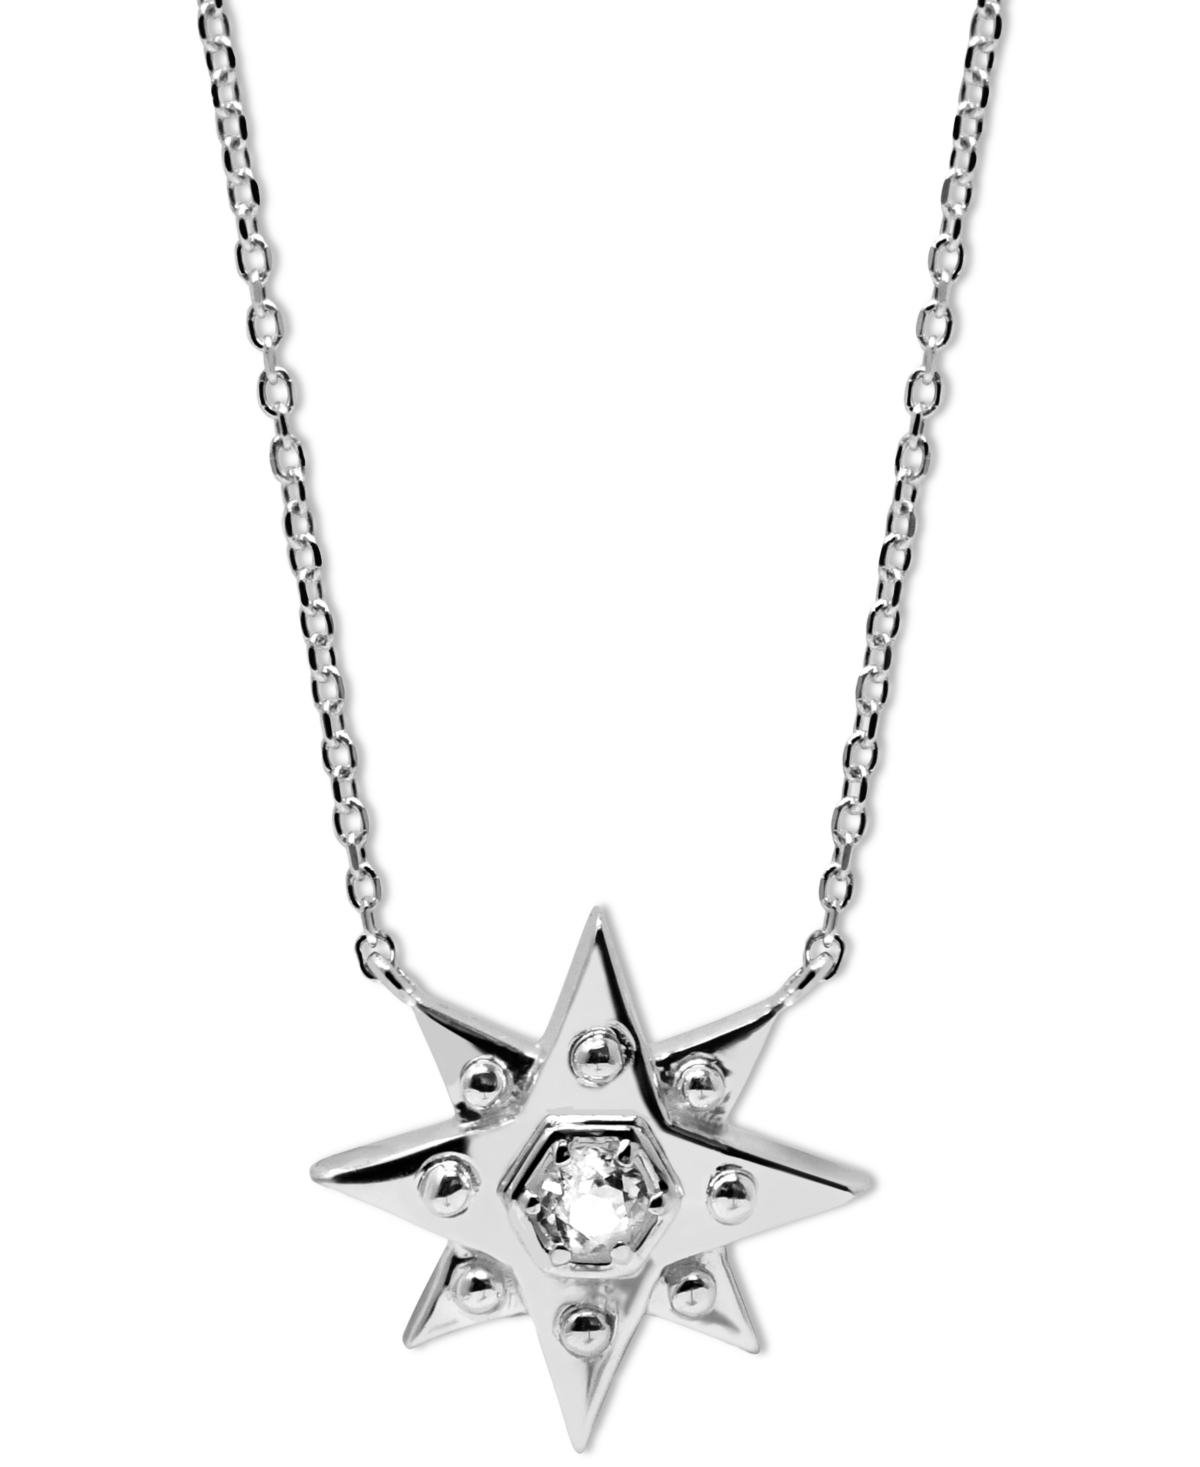 White Topaz (1/10 ct. t.w.) Star Pendant Necklace in Sterling Silver, 16" + 1" extender - Sterling Silver